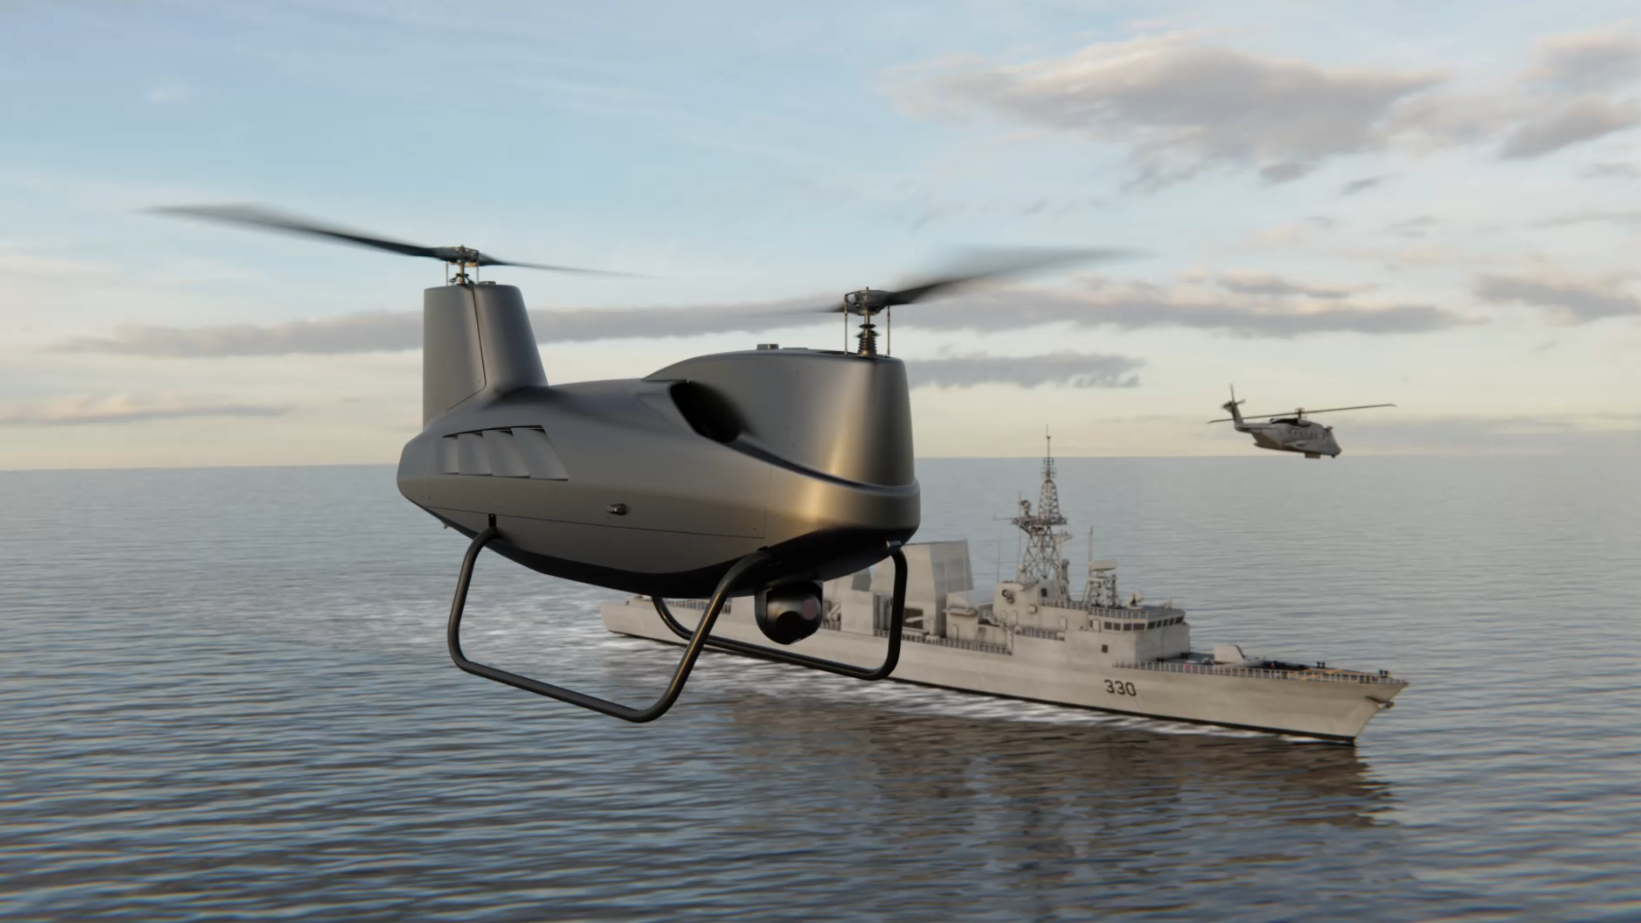 LX300 unmanned helicopter flying over ocean with ship and MHP in the background